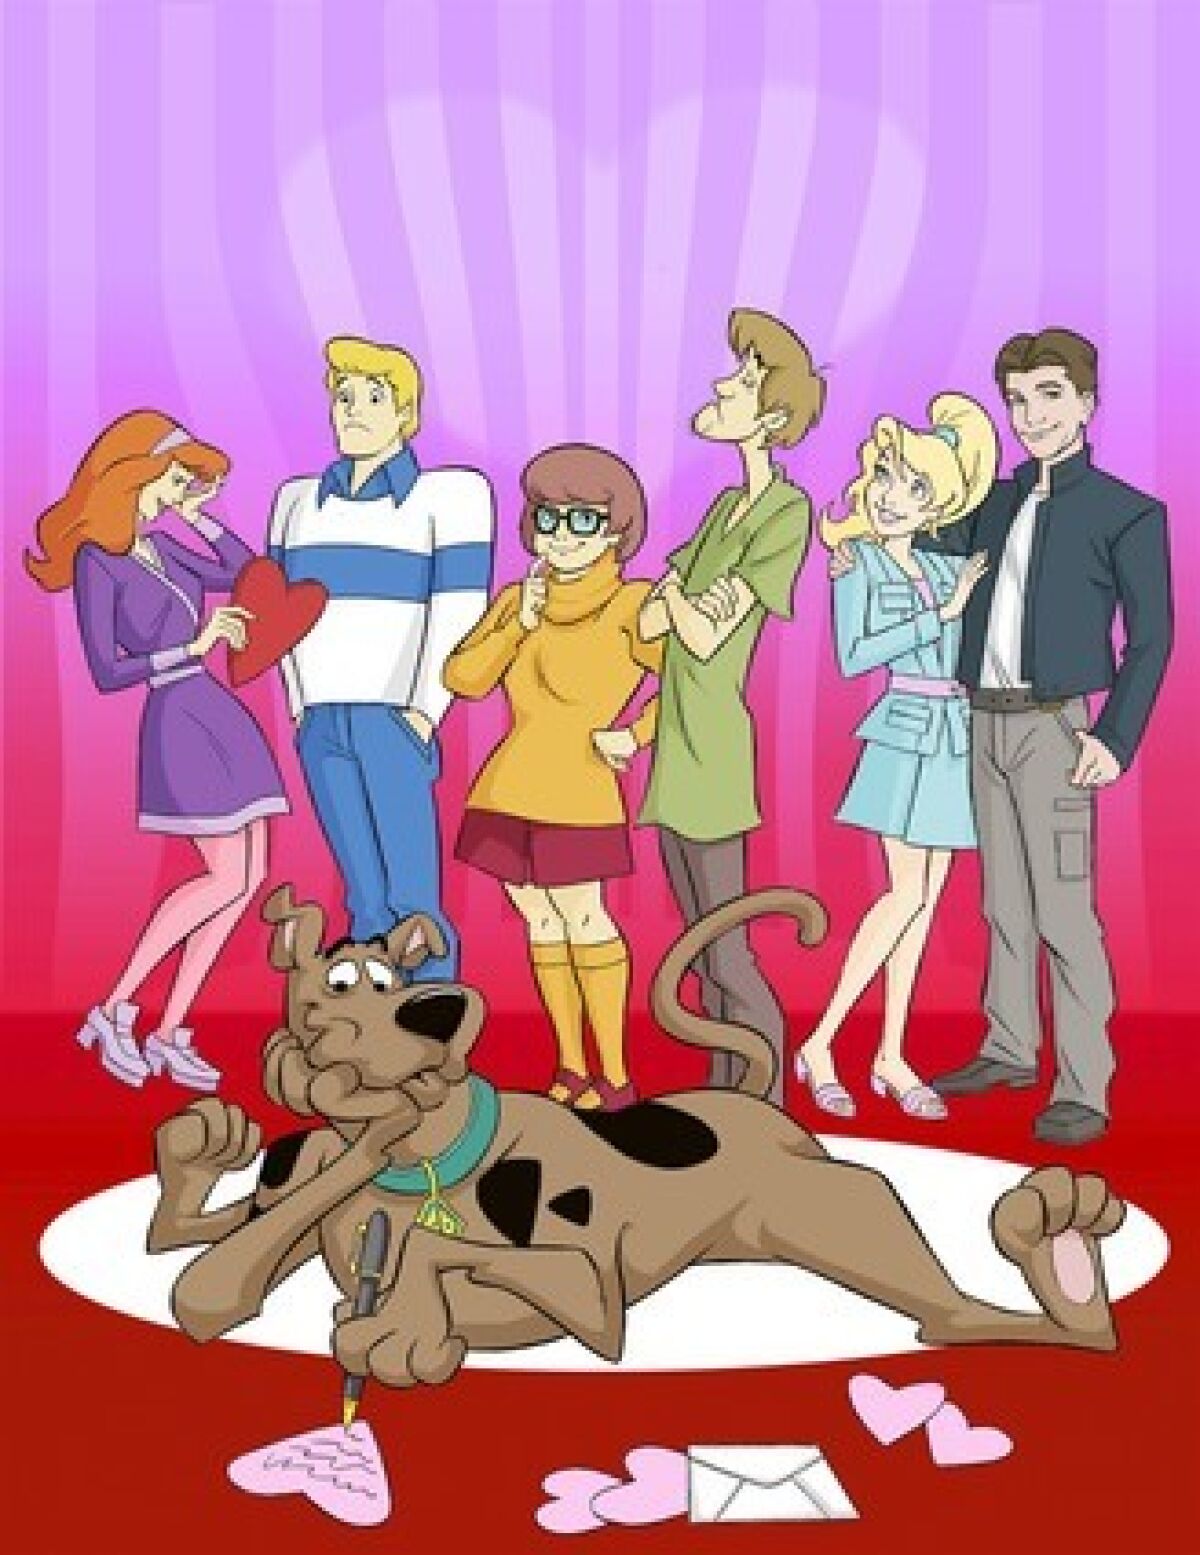 Scooby Doo movie 'Scoob' is headed to video on demand - Los Angeles Times